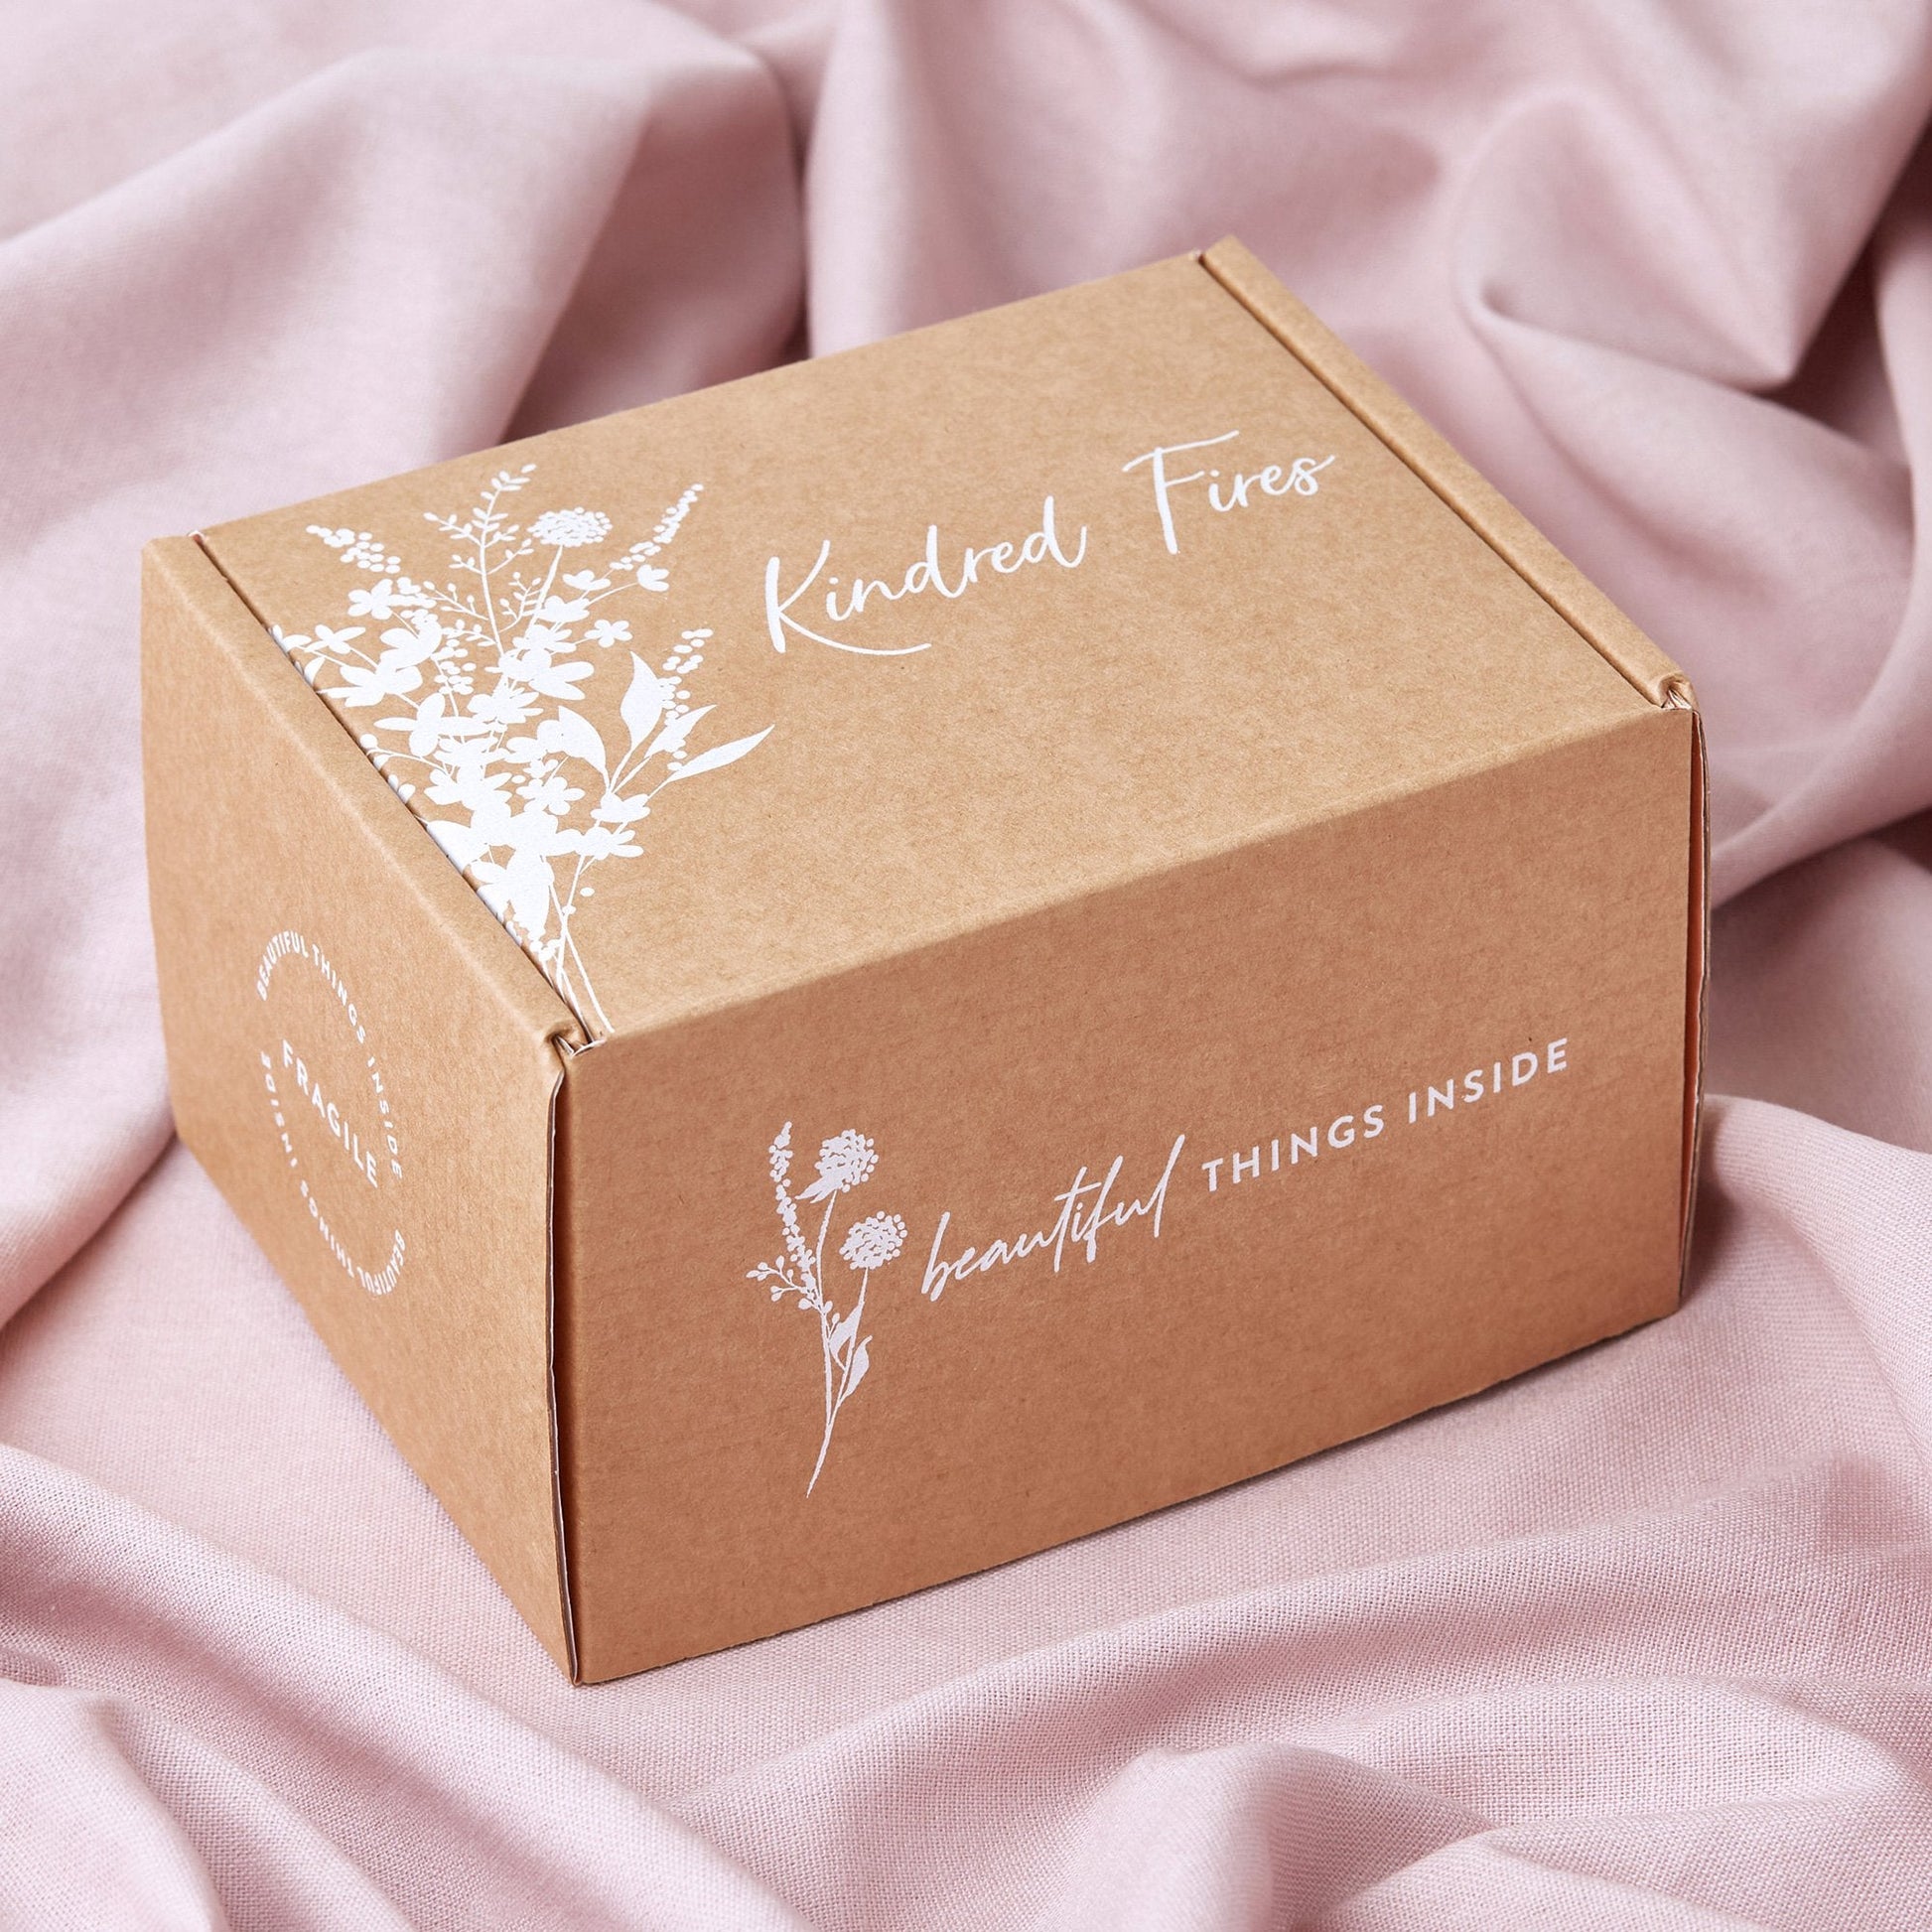 You're My Absolute Favourite Pink Candle Gift - Kindred Fires